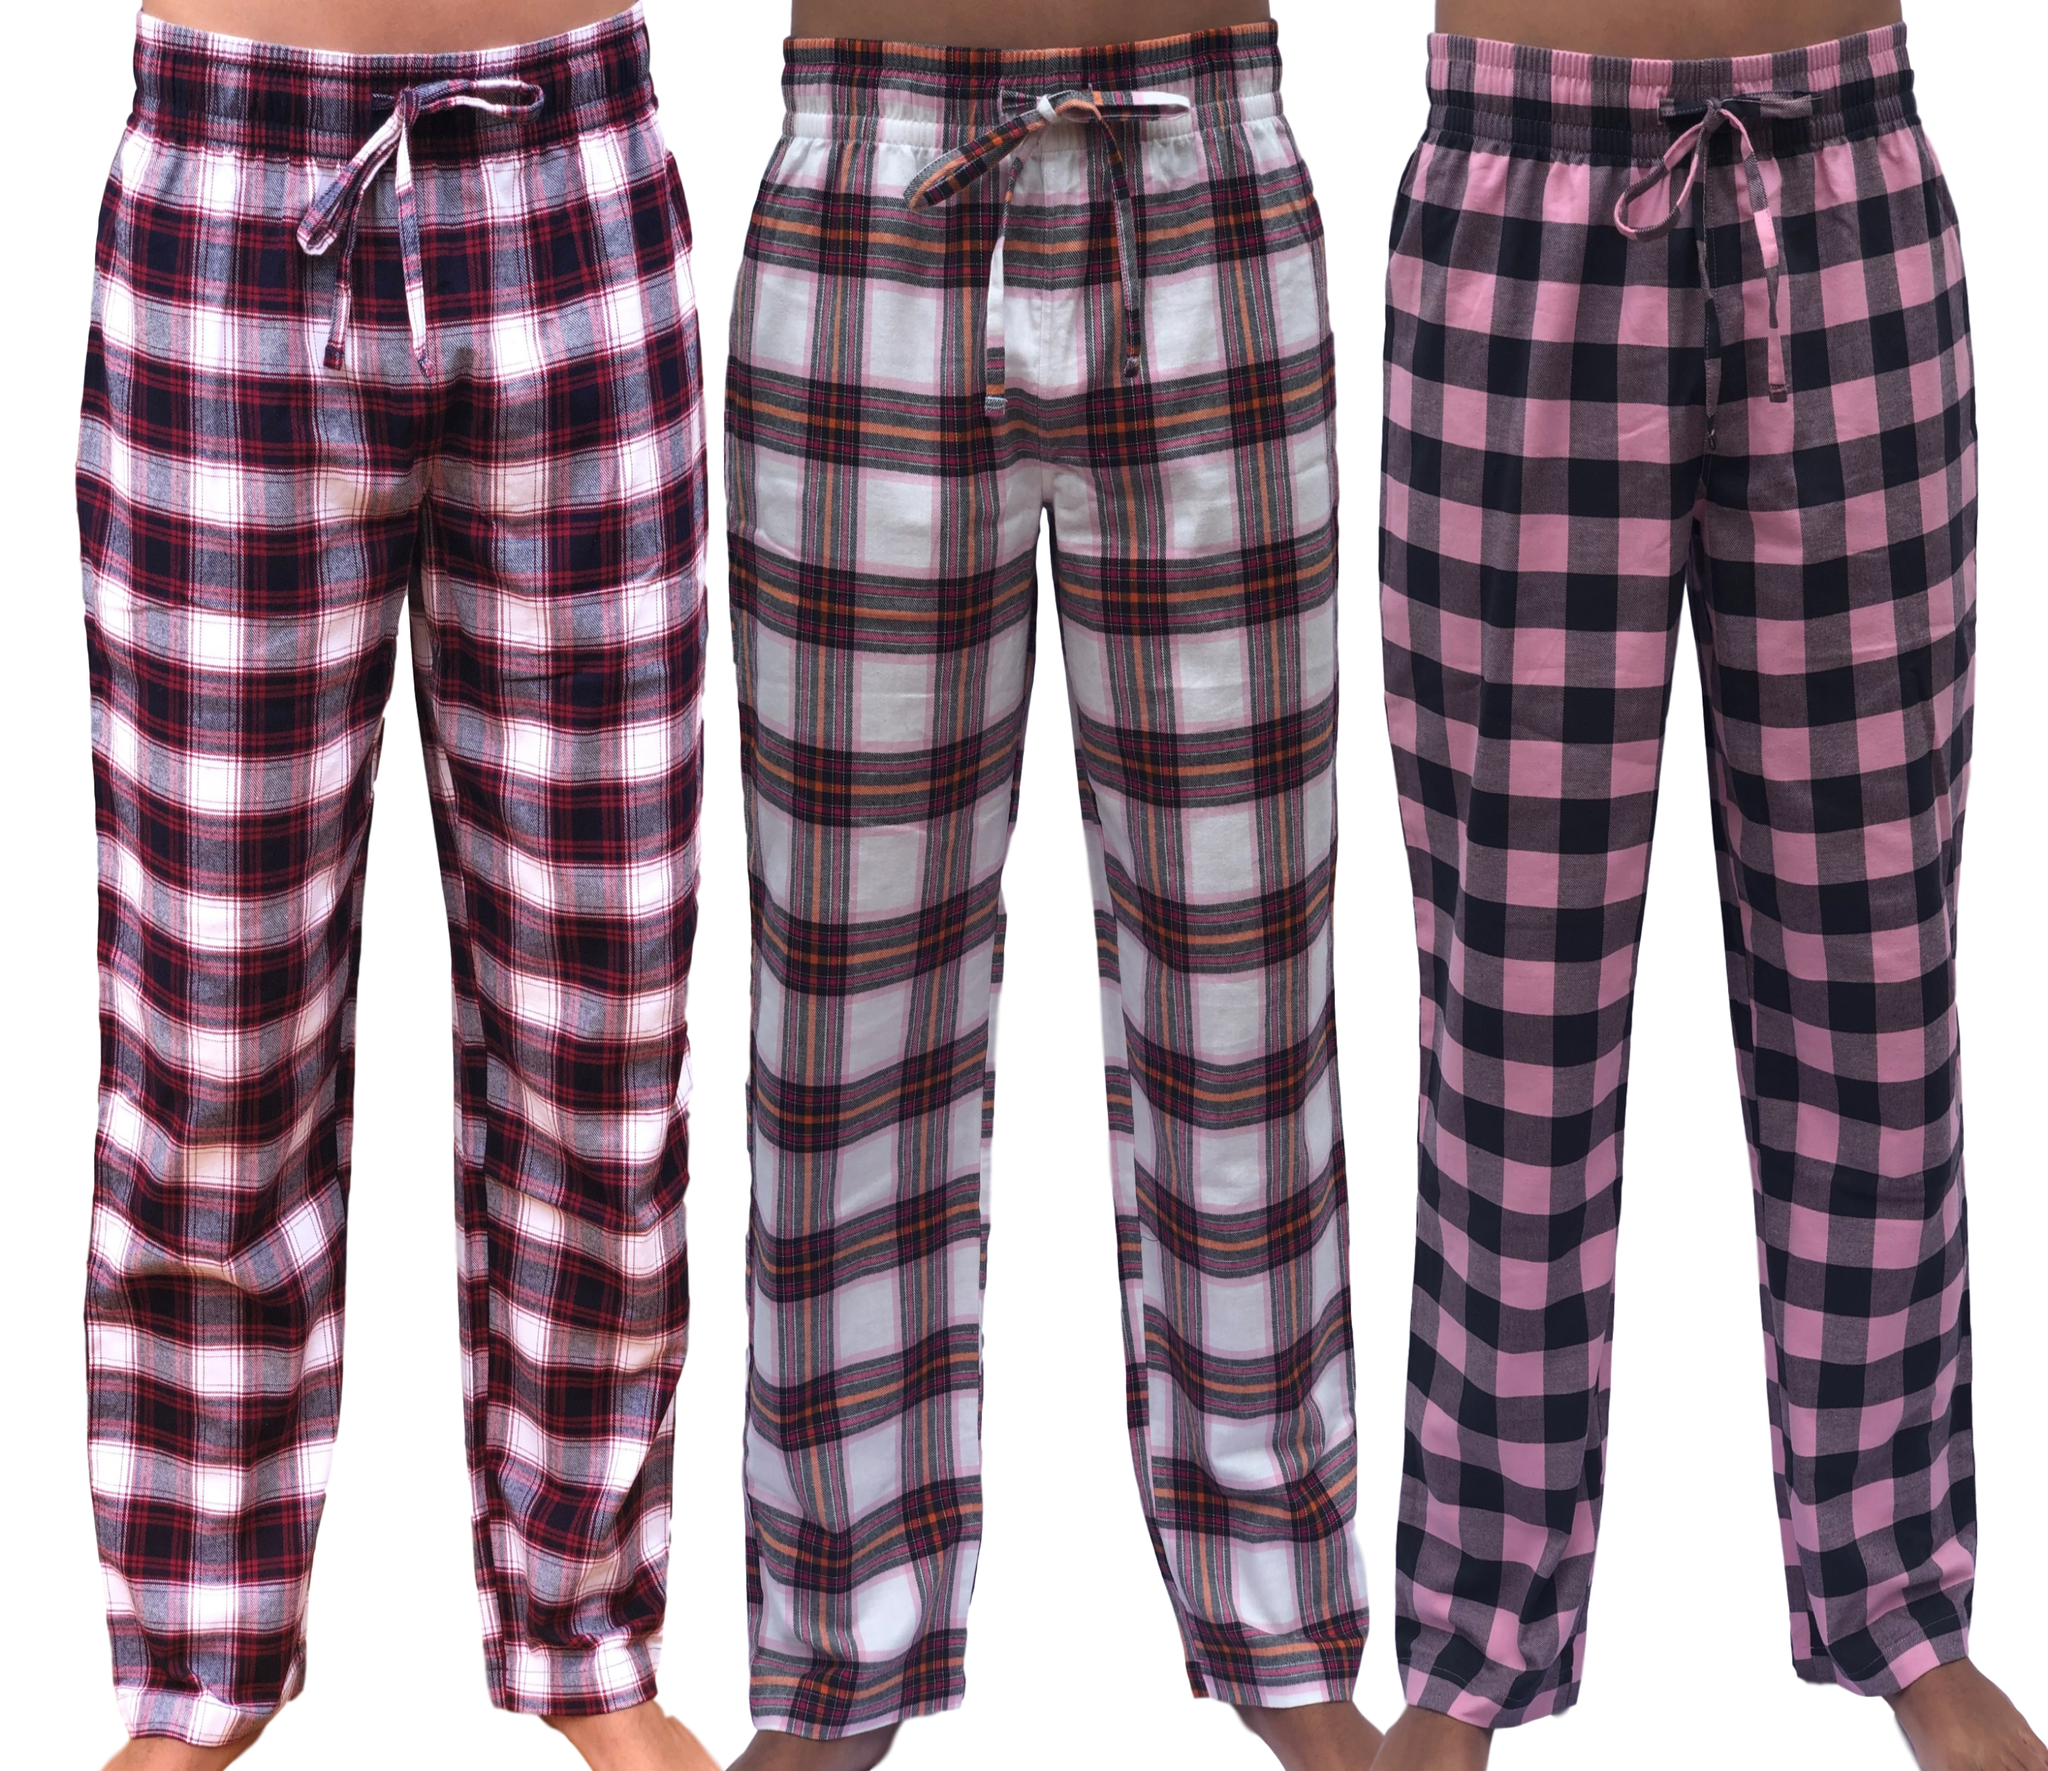 Essential Elements 3 Pack: Womens Cotton Joggers - 100% Cotton Lounge  Athletic Casual Sleep Casual Pajama PJ Pants Sweatpants, Set D, Small 